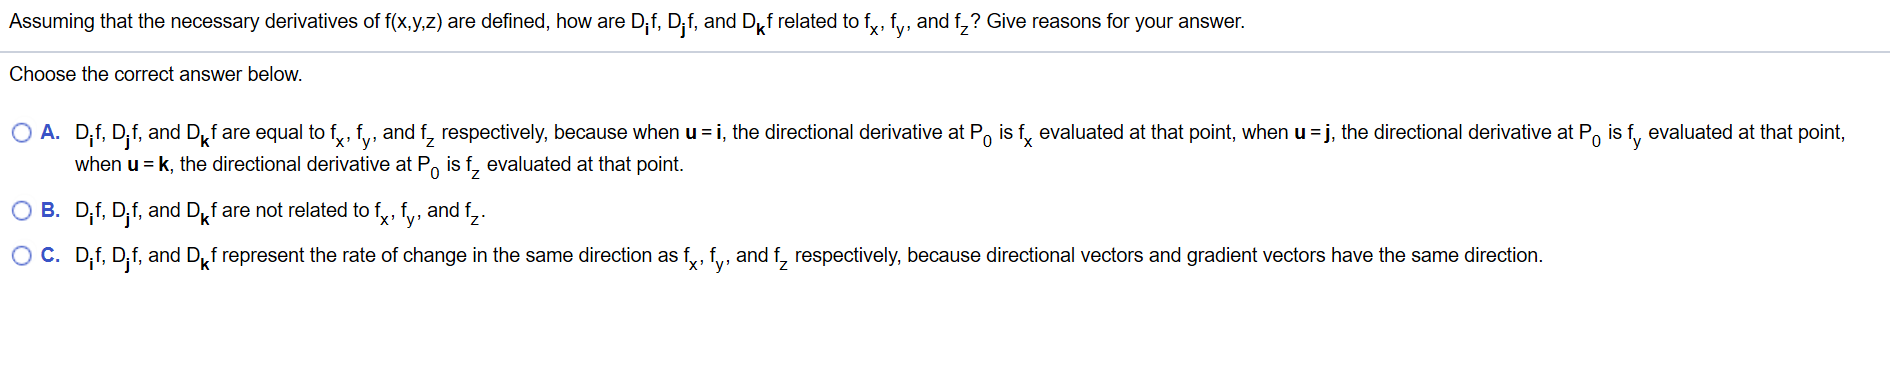 Assuming that the necessary derivatives of f(x,y,z) are defined, how are Dif, Dif, and Df related to f, fy, and f,? Give reasons for your answer.
Choose the correct answer below.
O A. D,f, D,f, and Df are equal to fy, fy, and f, respectively, because when u i, the directional derivative at Po is f, evaluated at that point, when u j, the directional derivative at Po is f, evaluated at that point,
when u k, the directional derivative at Po is f, evaluated at that point
0
X
O B. D,f, D,f, and Df are not related to fy, fv, and f,.
O C. D,f, D,f, and Df represent the rate of change in the same direction as fy, f, and f, respectively, because directional vectors and gradient vectors have the same direction.
